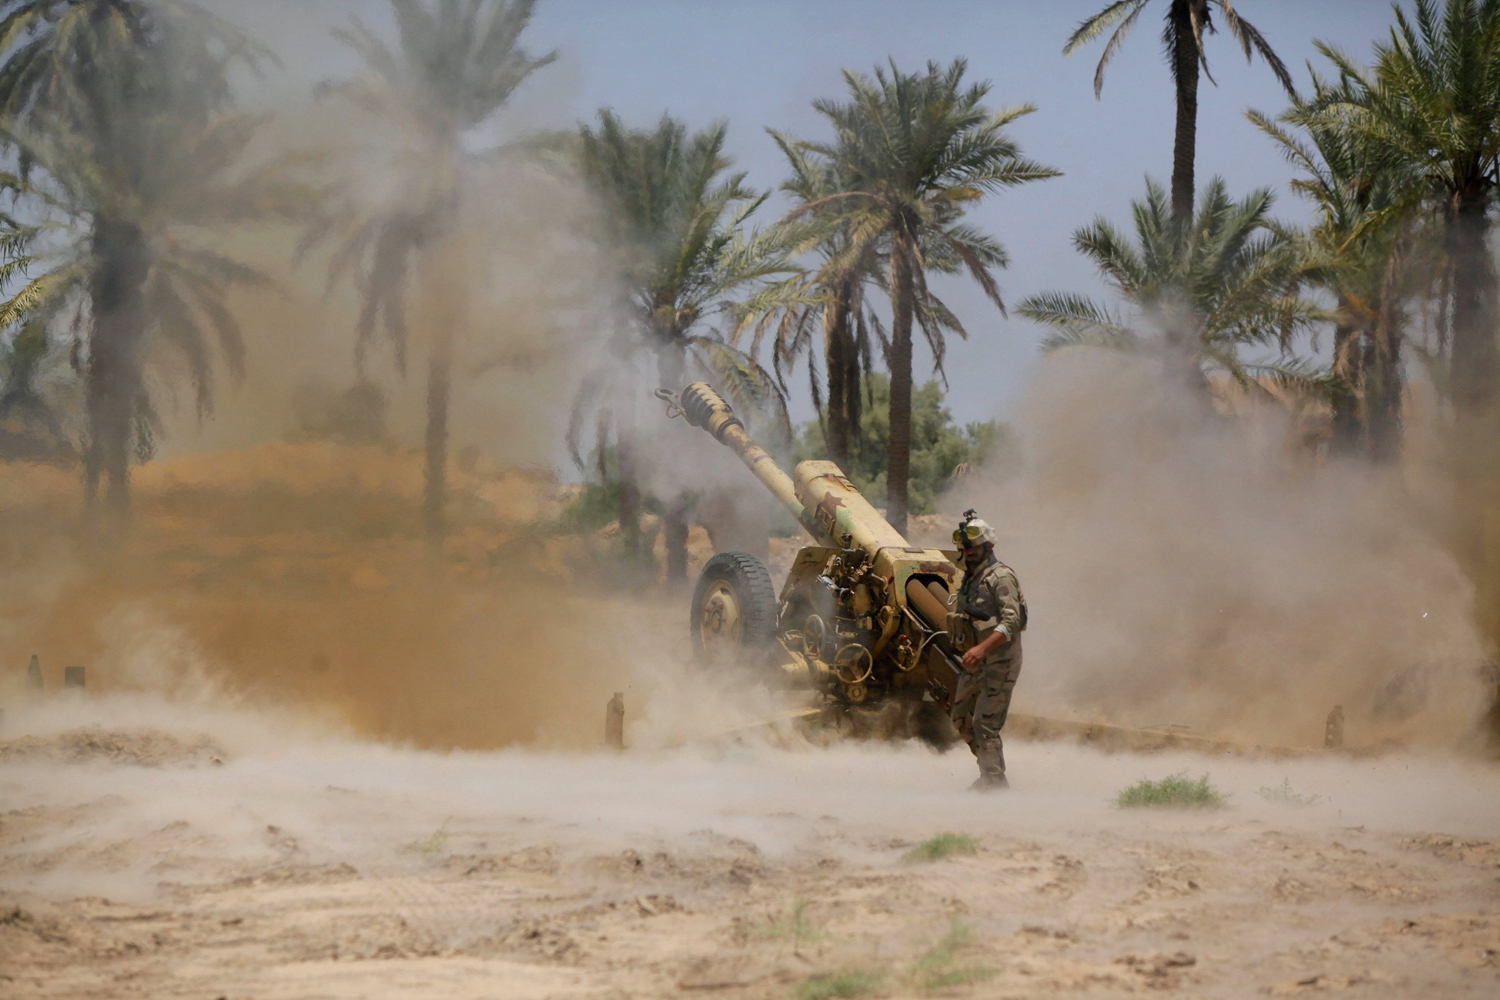 Iraqi security forces fire artillery during clashes with Sunni militant group Islamic State of Iraq and Syria (ISIS) in Jurf al-Sakhar June 14.